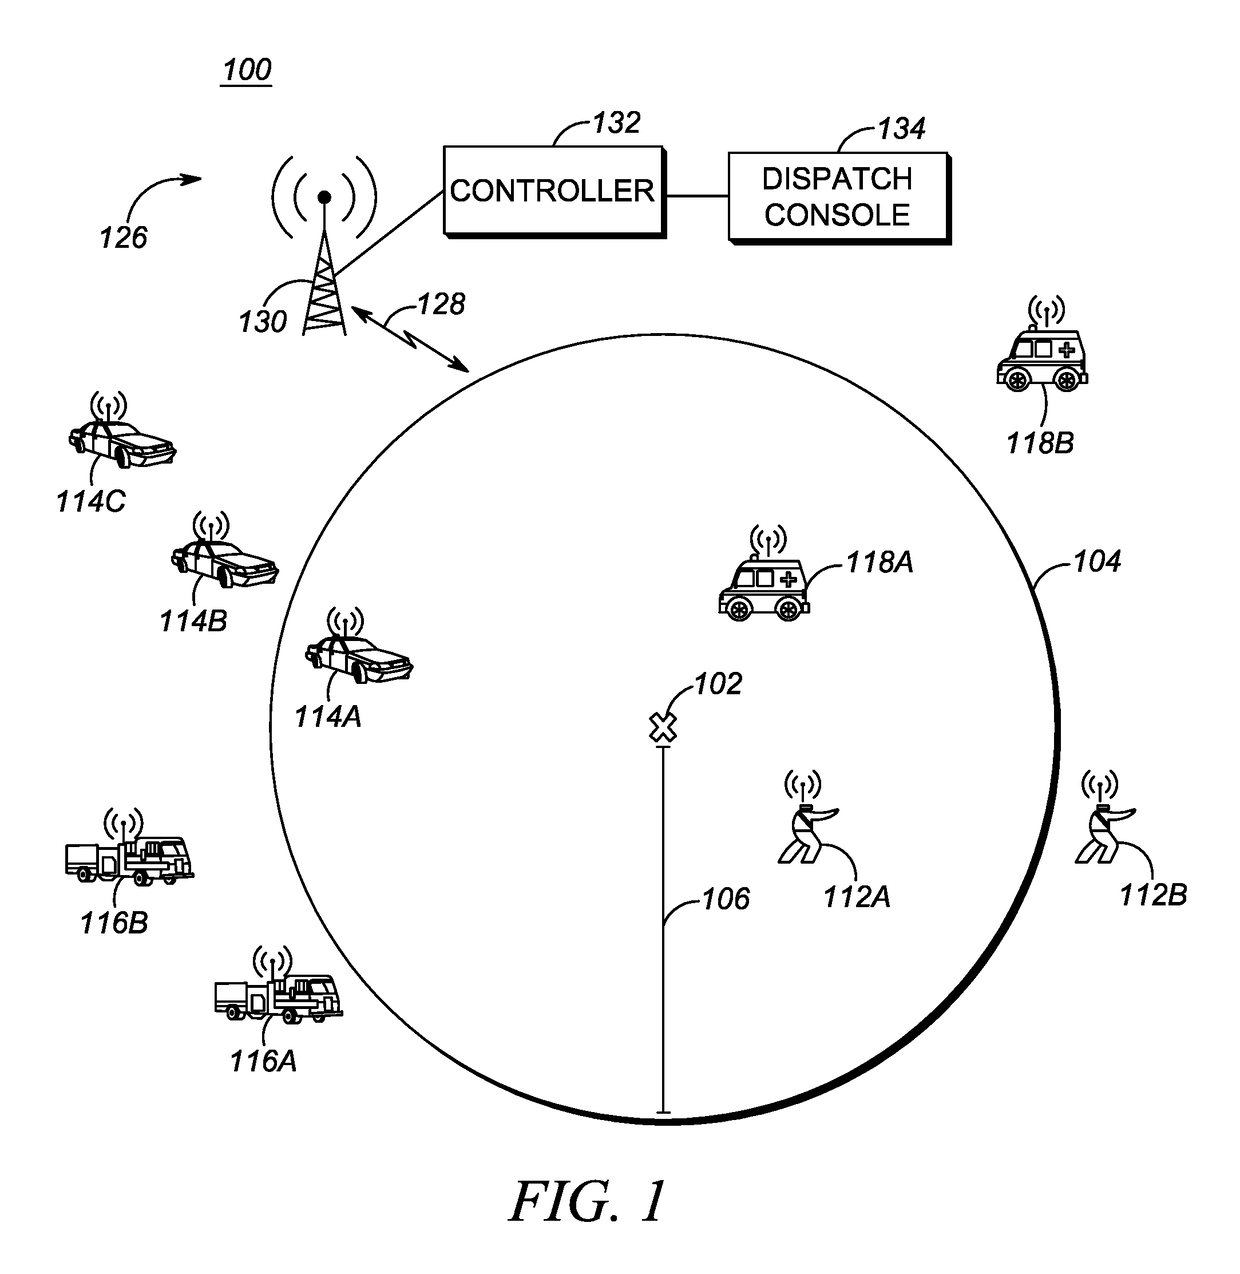 Method and apparatus for dynamic location-based group formation for ensuring required responders